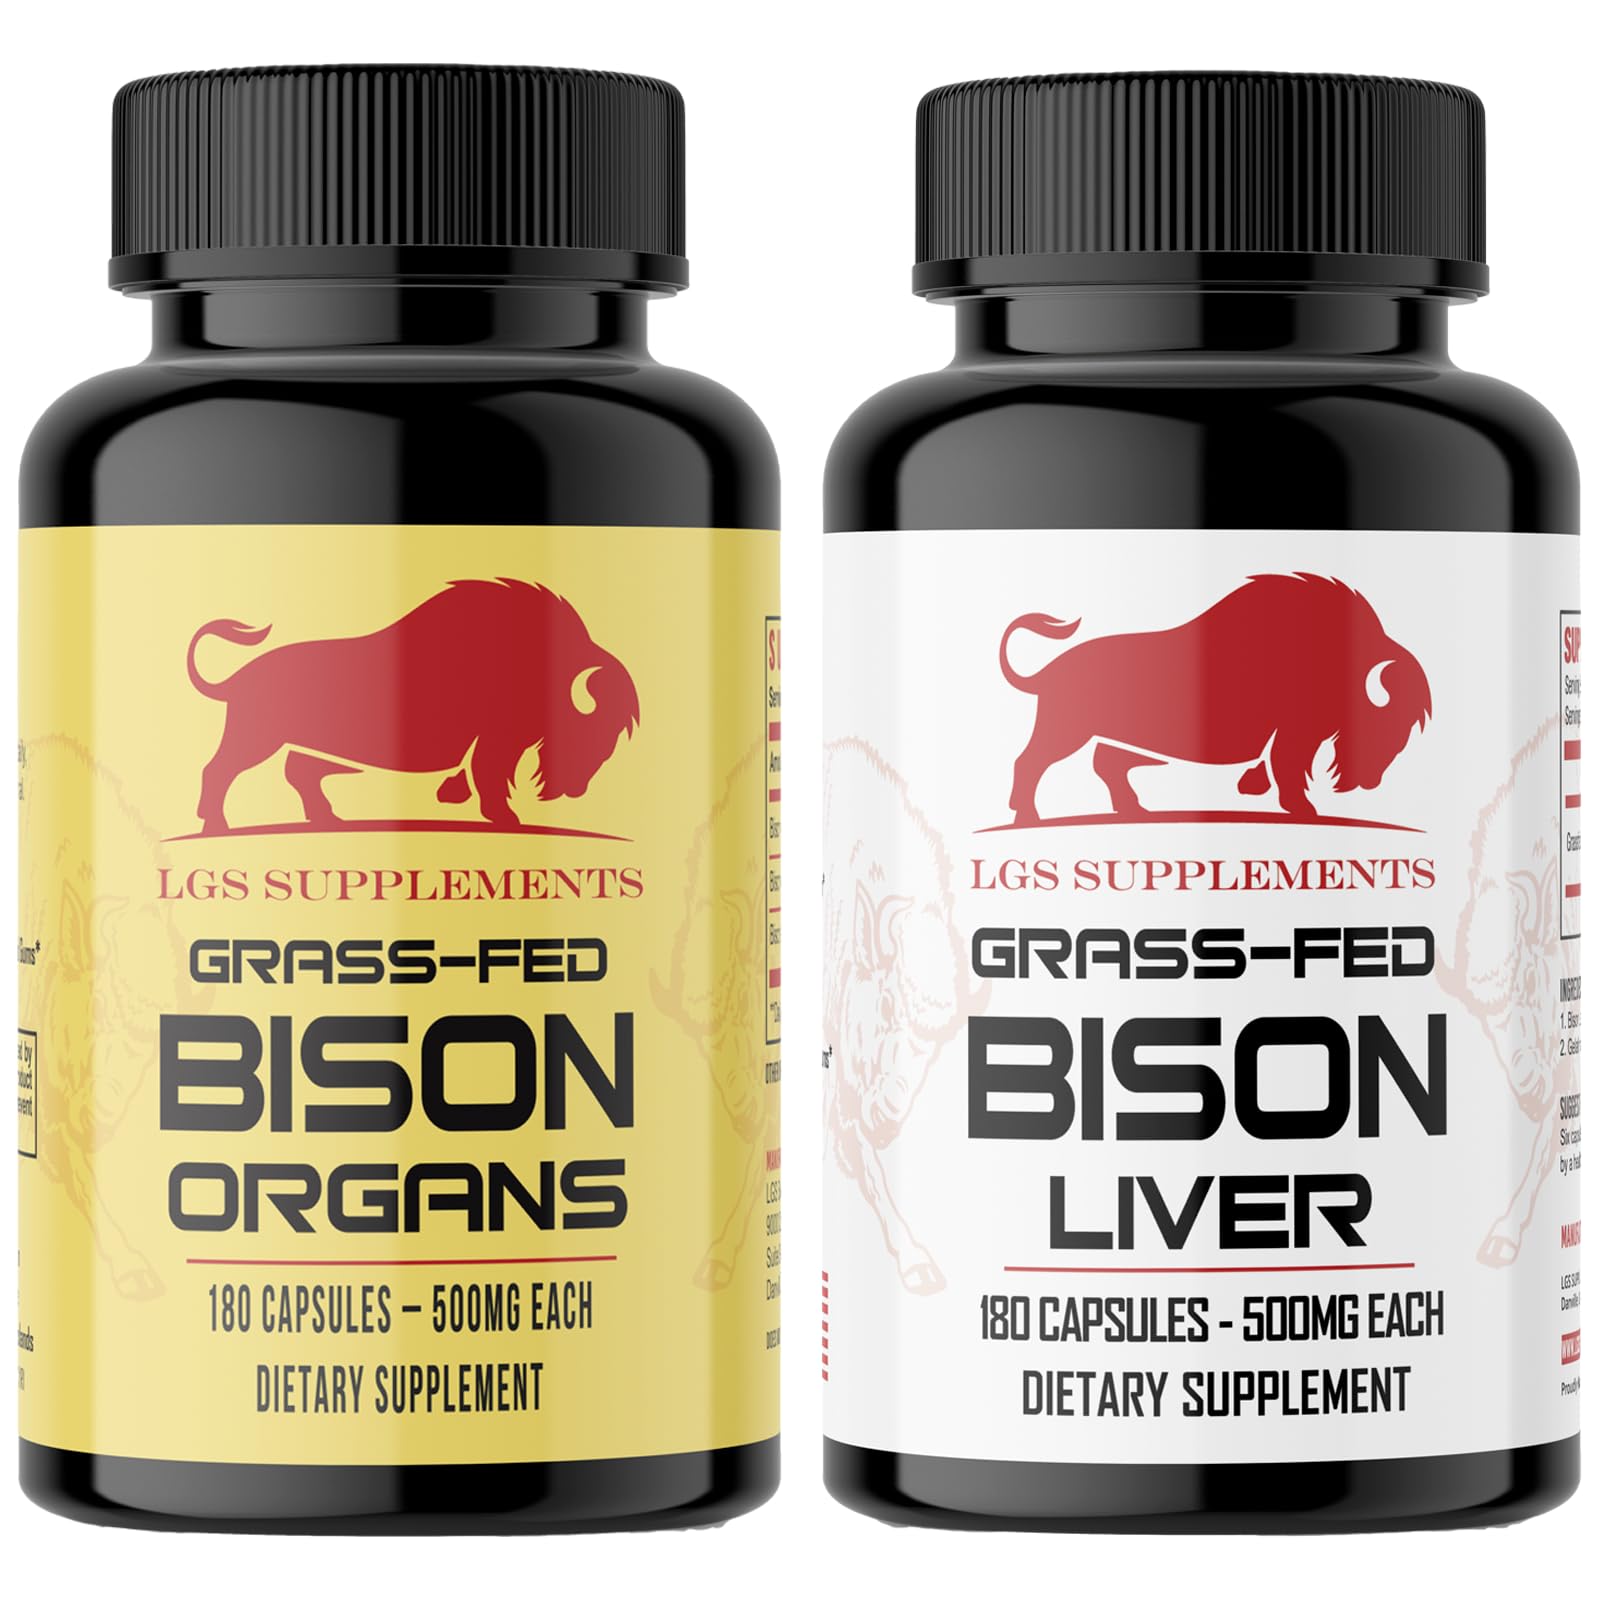 LGS Supplements Starter Pack, Grass Fed Bison Liver Capsules, Organ Capsules, Non-GMO, Supports Energy Production, Detoxification, Digestion, Immunity and Full Body Wellness